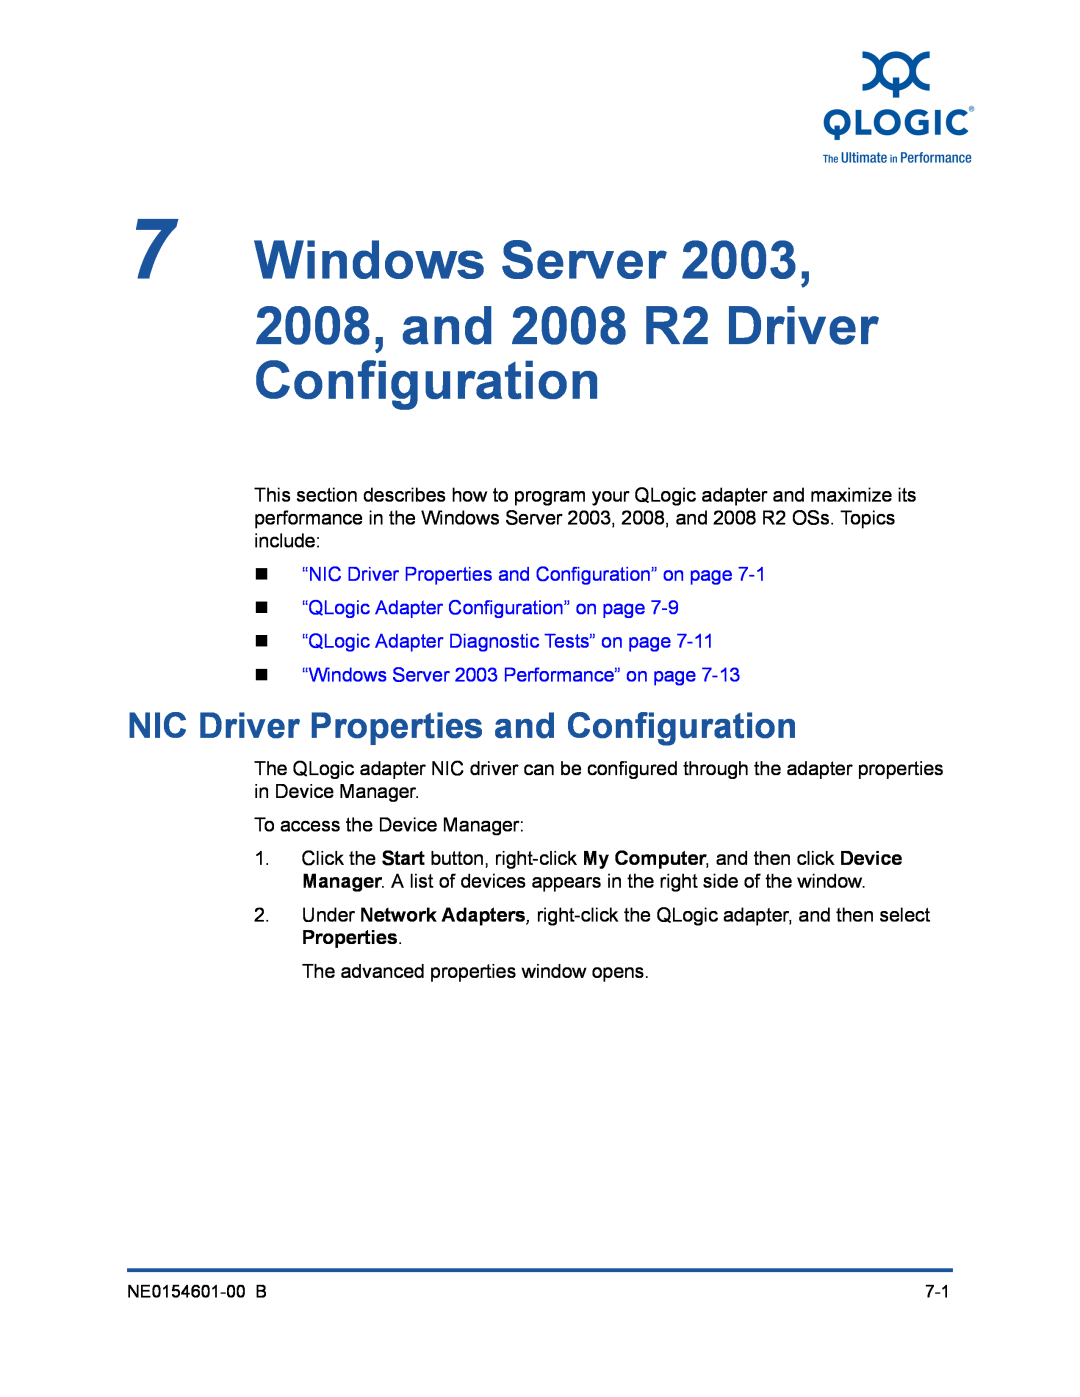 Q-Logic 3000, 3100 manual Windows Server 2008, and 2008 R2 Driver Configuration, NIC Driver Properties and Configuration 